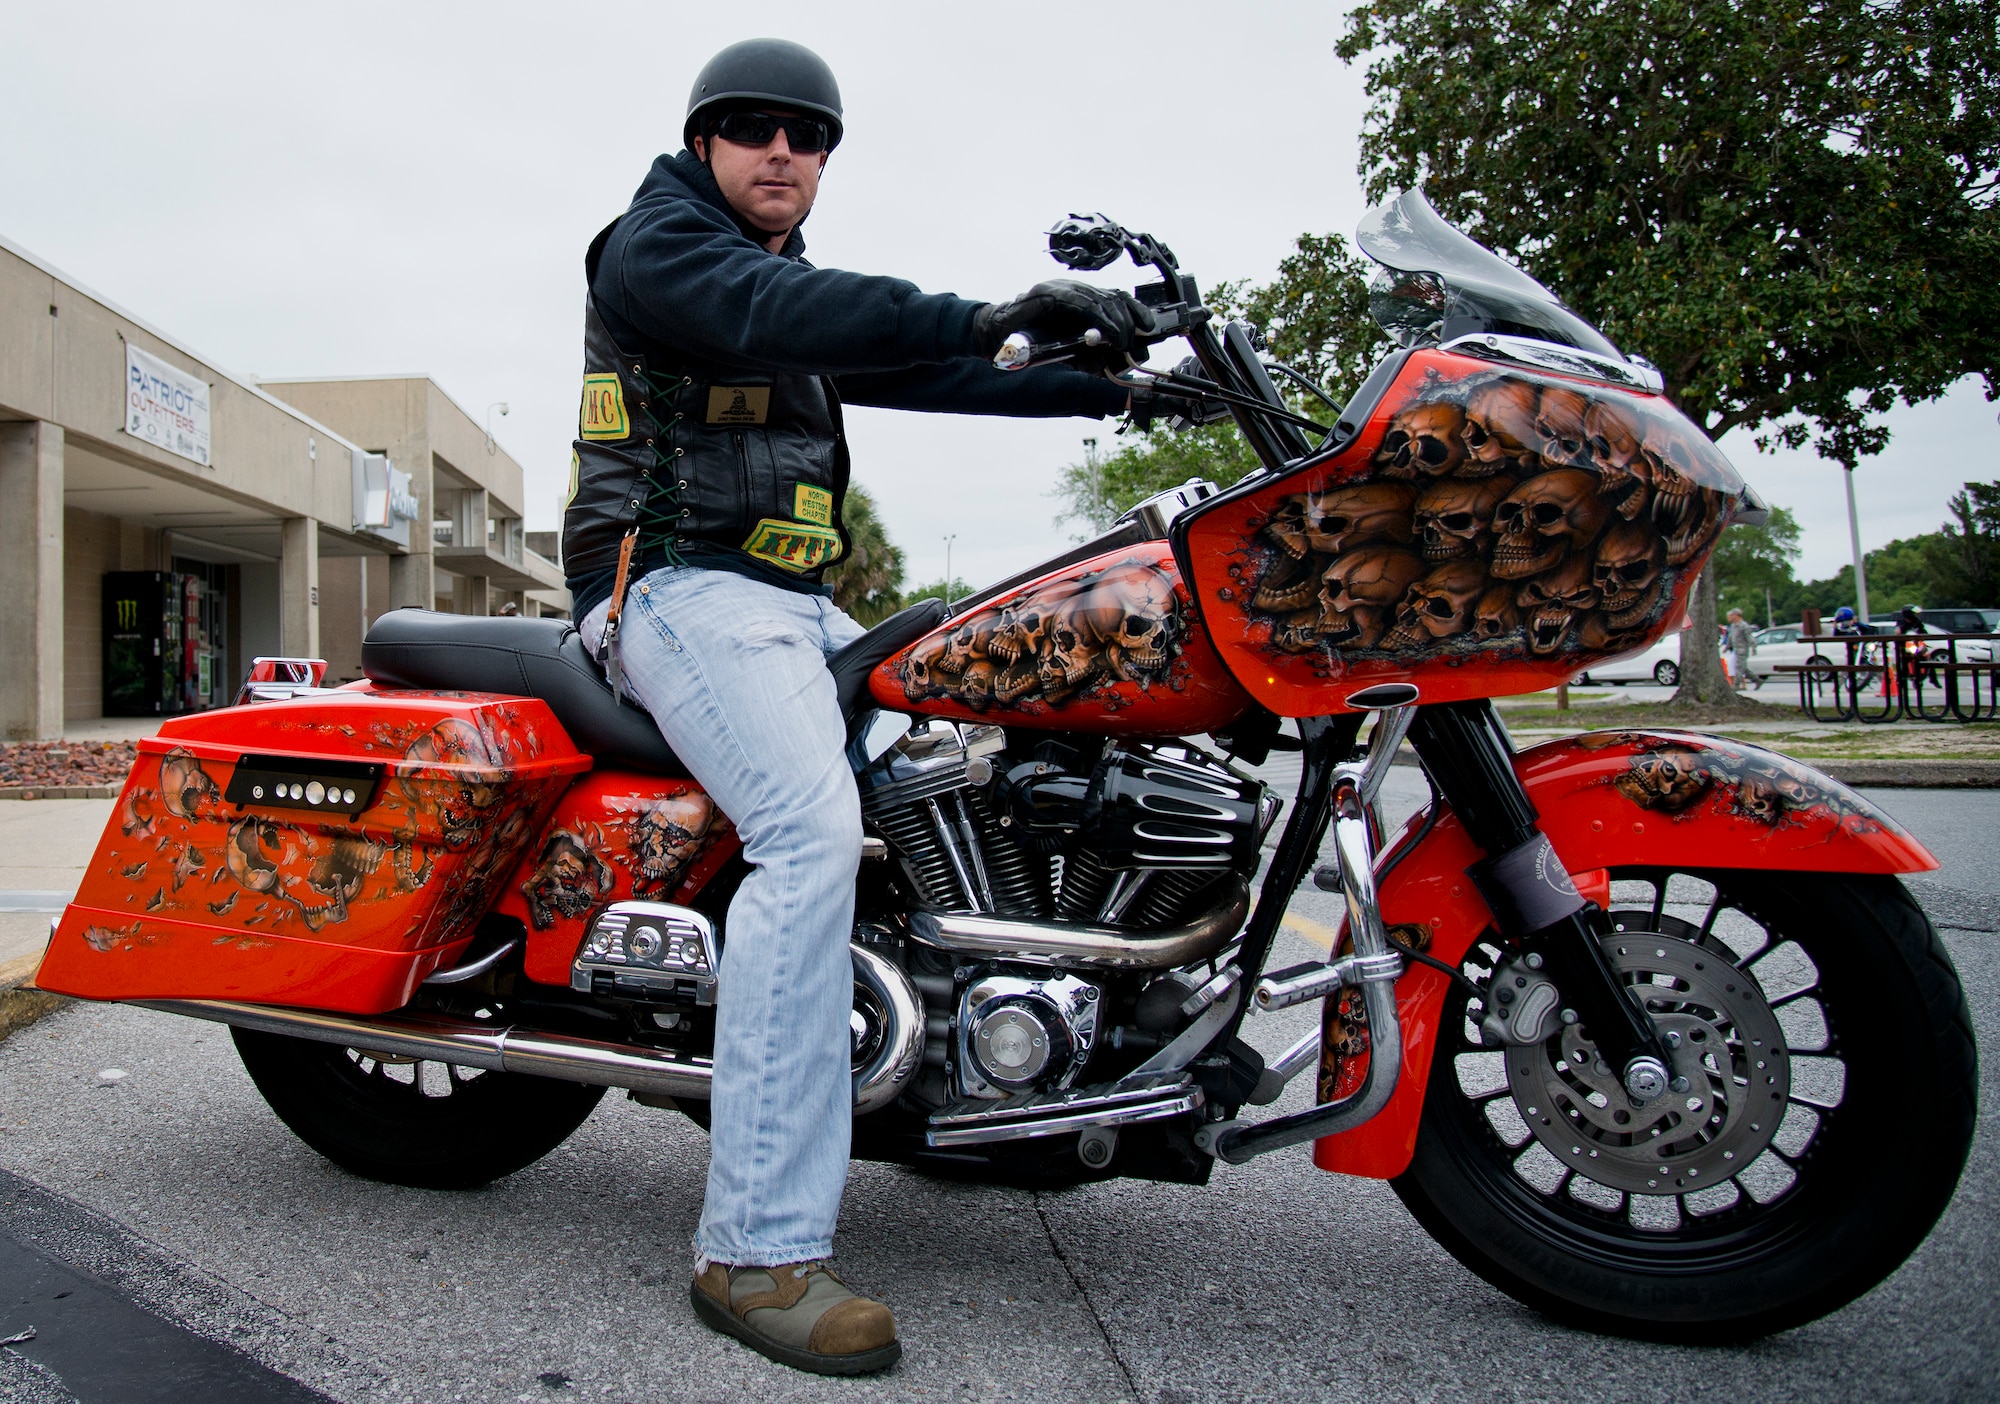 A biker shows off his custom-painted skull bike before taking off from the base’s annual motorcycle safety rally April 15 at Eglin Air Force Base, Fla.  Approximately 600 civilian and military riders rode in for the joint 53rd Wing/96th Test Wing event. (U.S. Air Force photo/Samuel King Jr.)